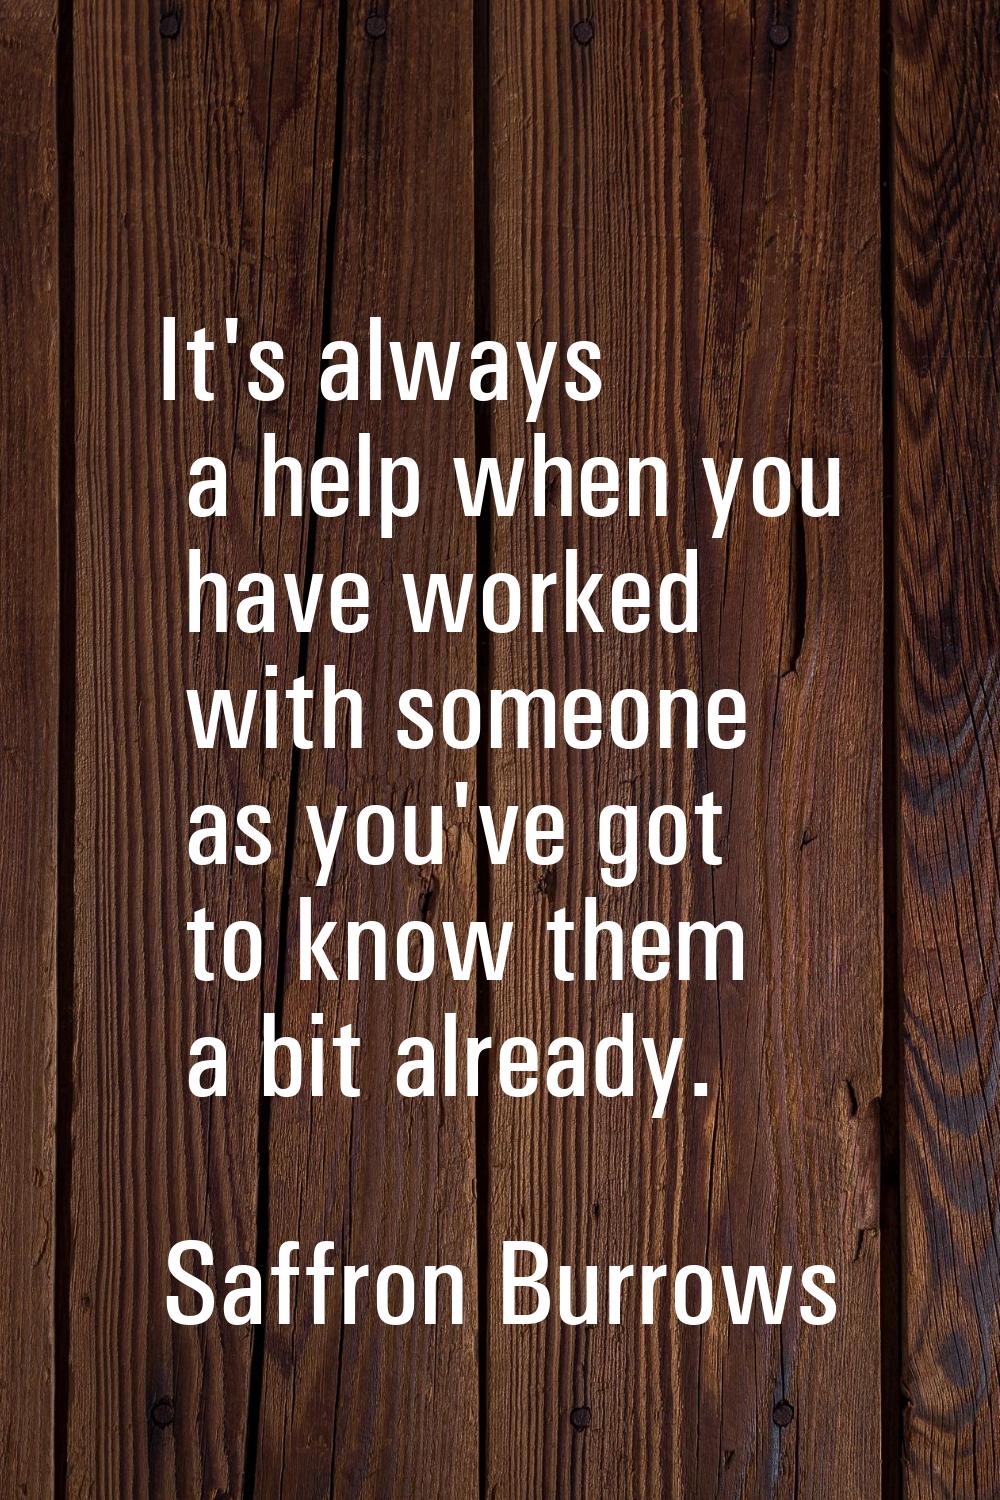 It's always a help when you have worked with someone as you've got to know them a bit already.